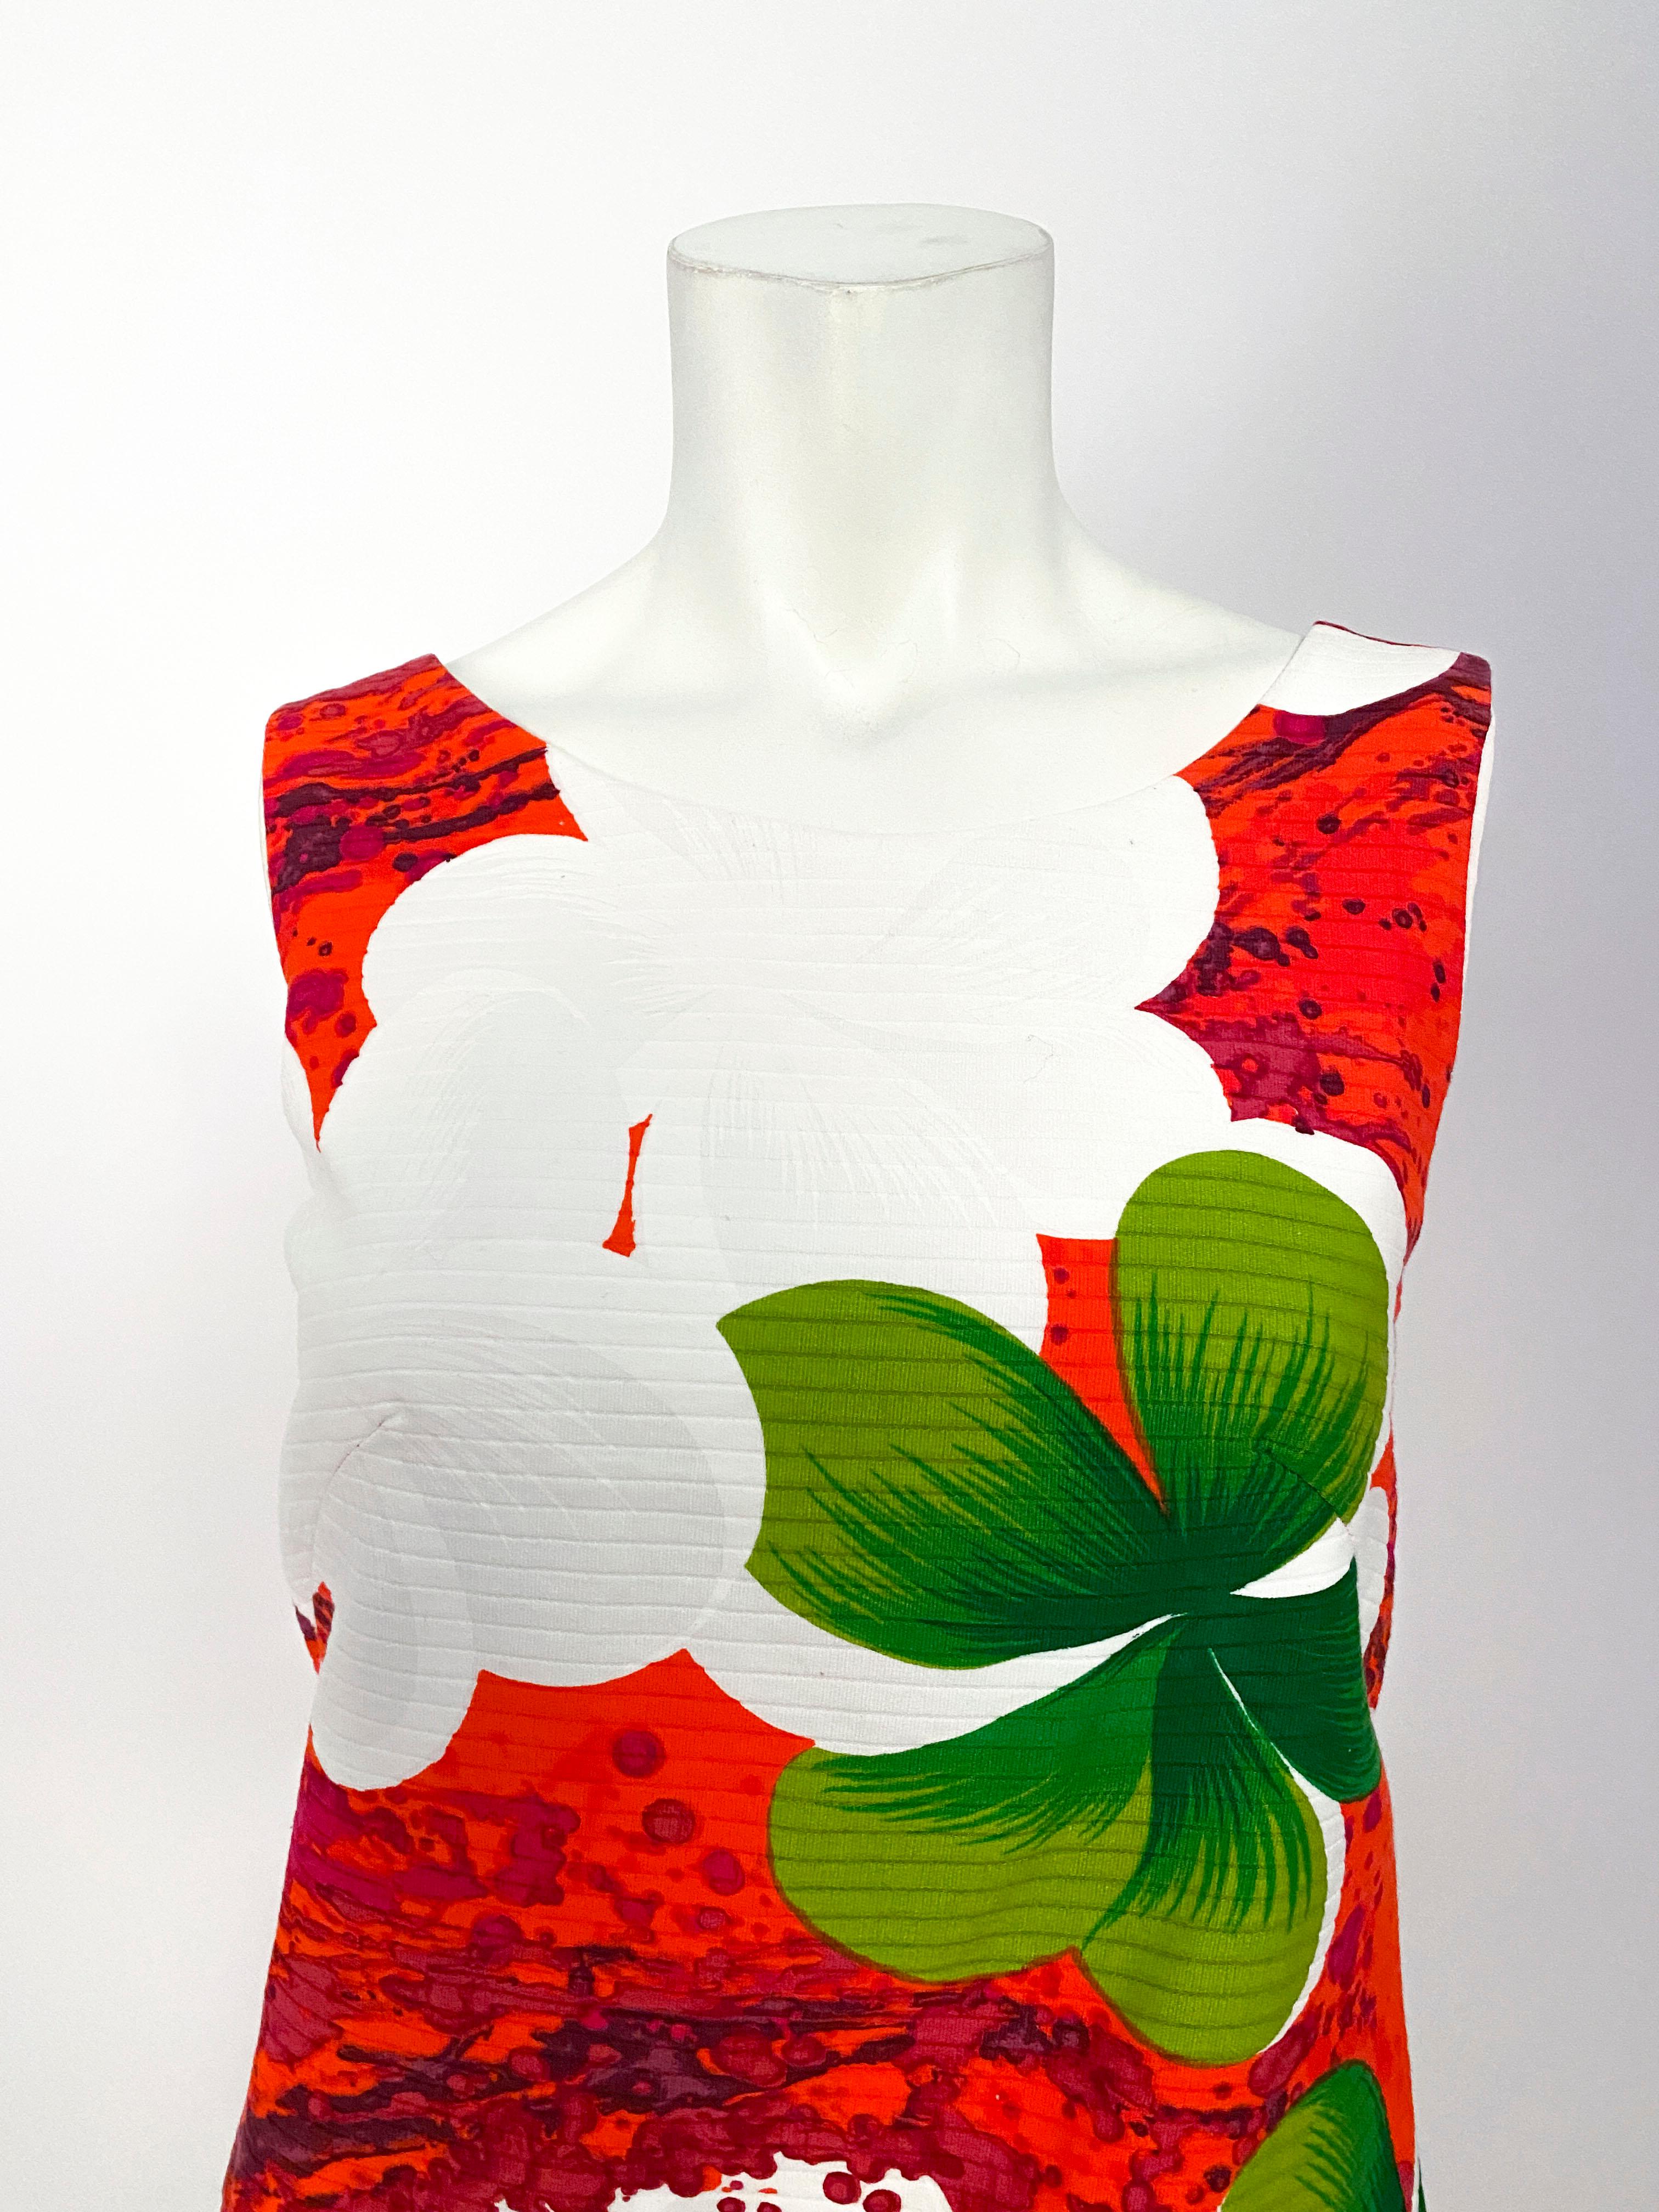 1970s skort dress (inset shorts hidden by exterior face panel) featuring a loud Hawaiian floral print in tones of red, greens, and whites. Garment details include enlarged patch pockets and split sides exposing shorts. Back zip closure.